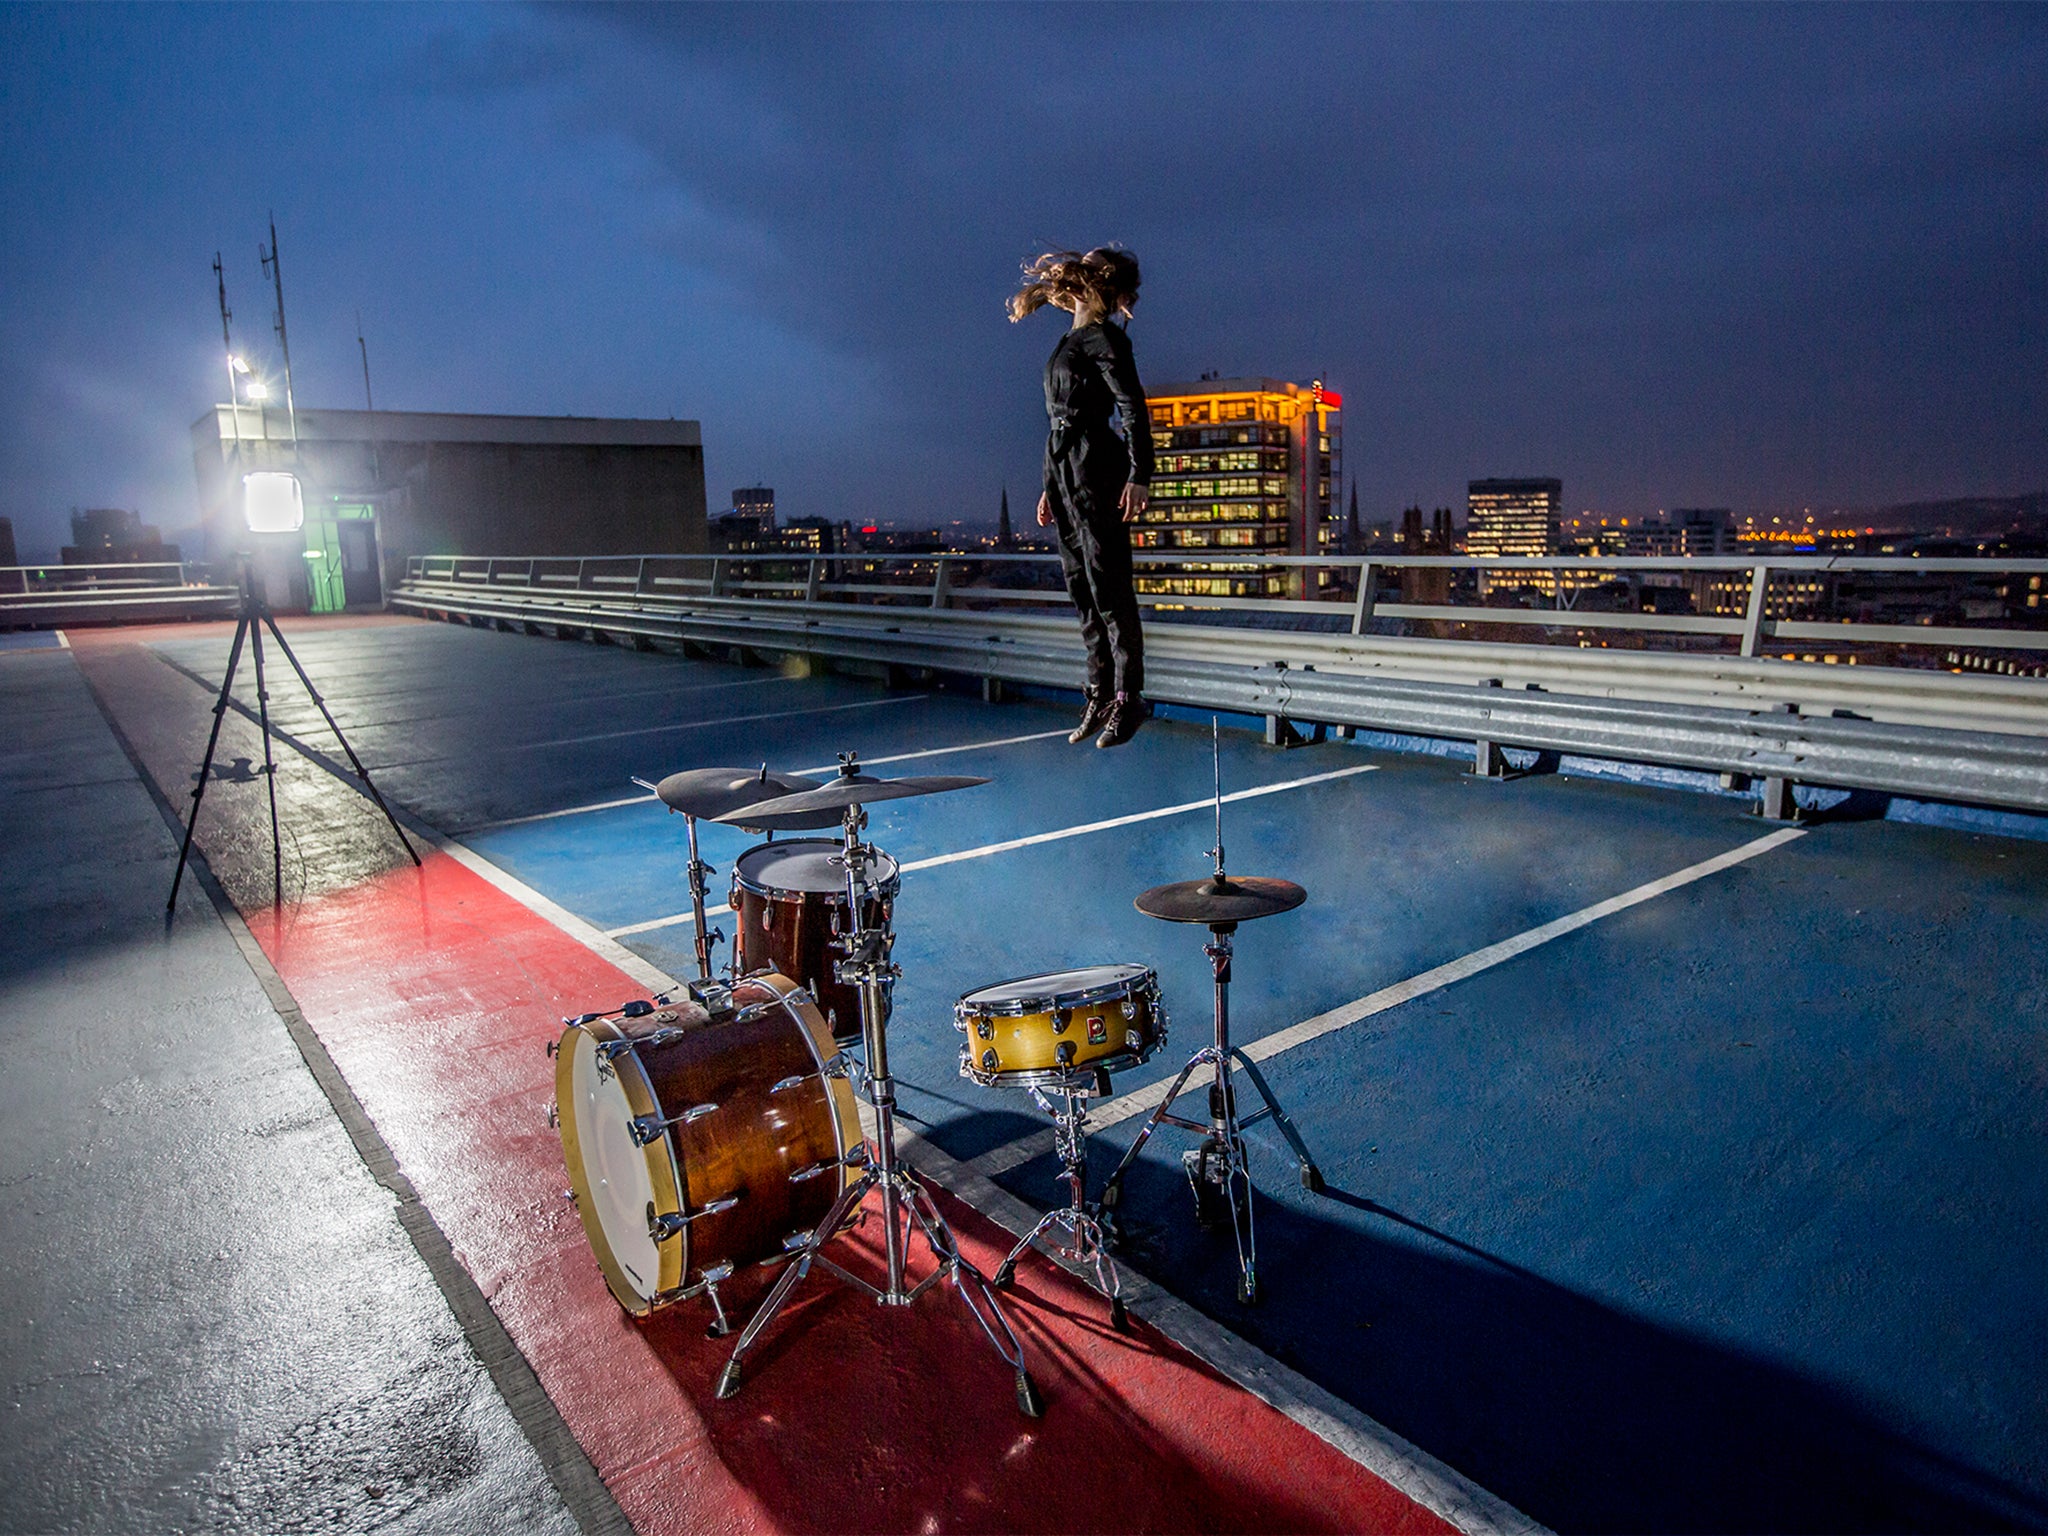 This year’s Dance Umbrella festival starts on a rooftop